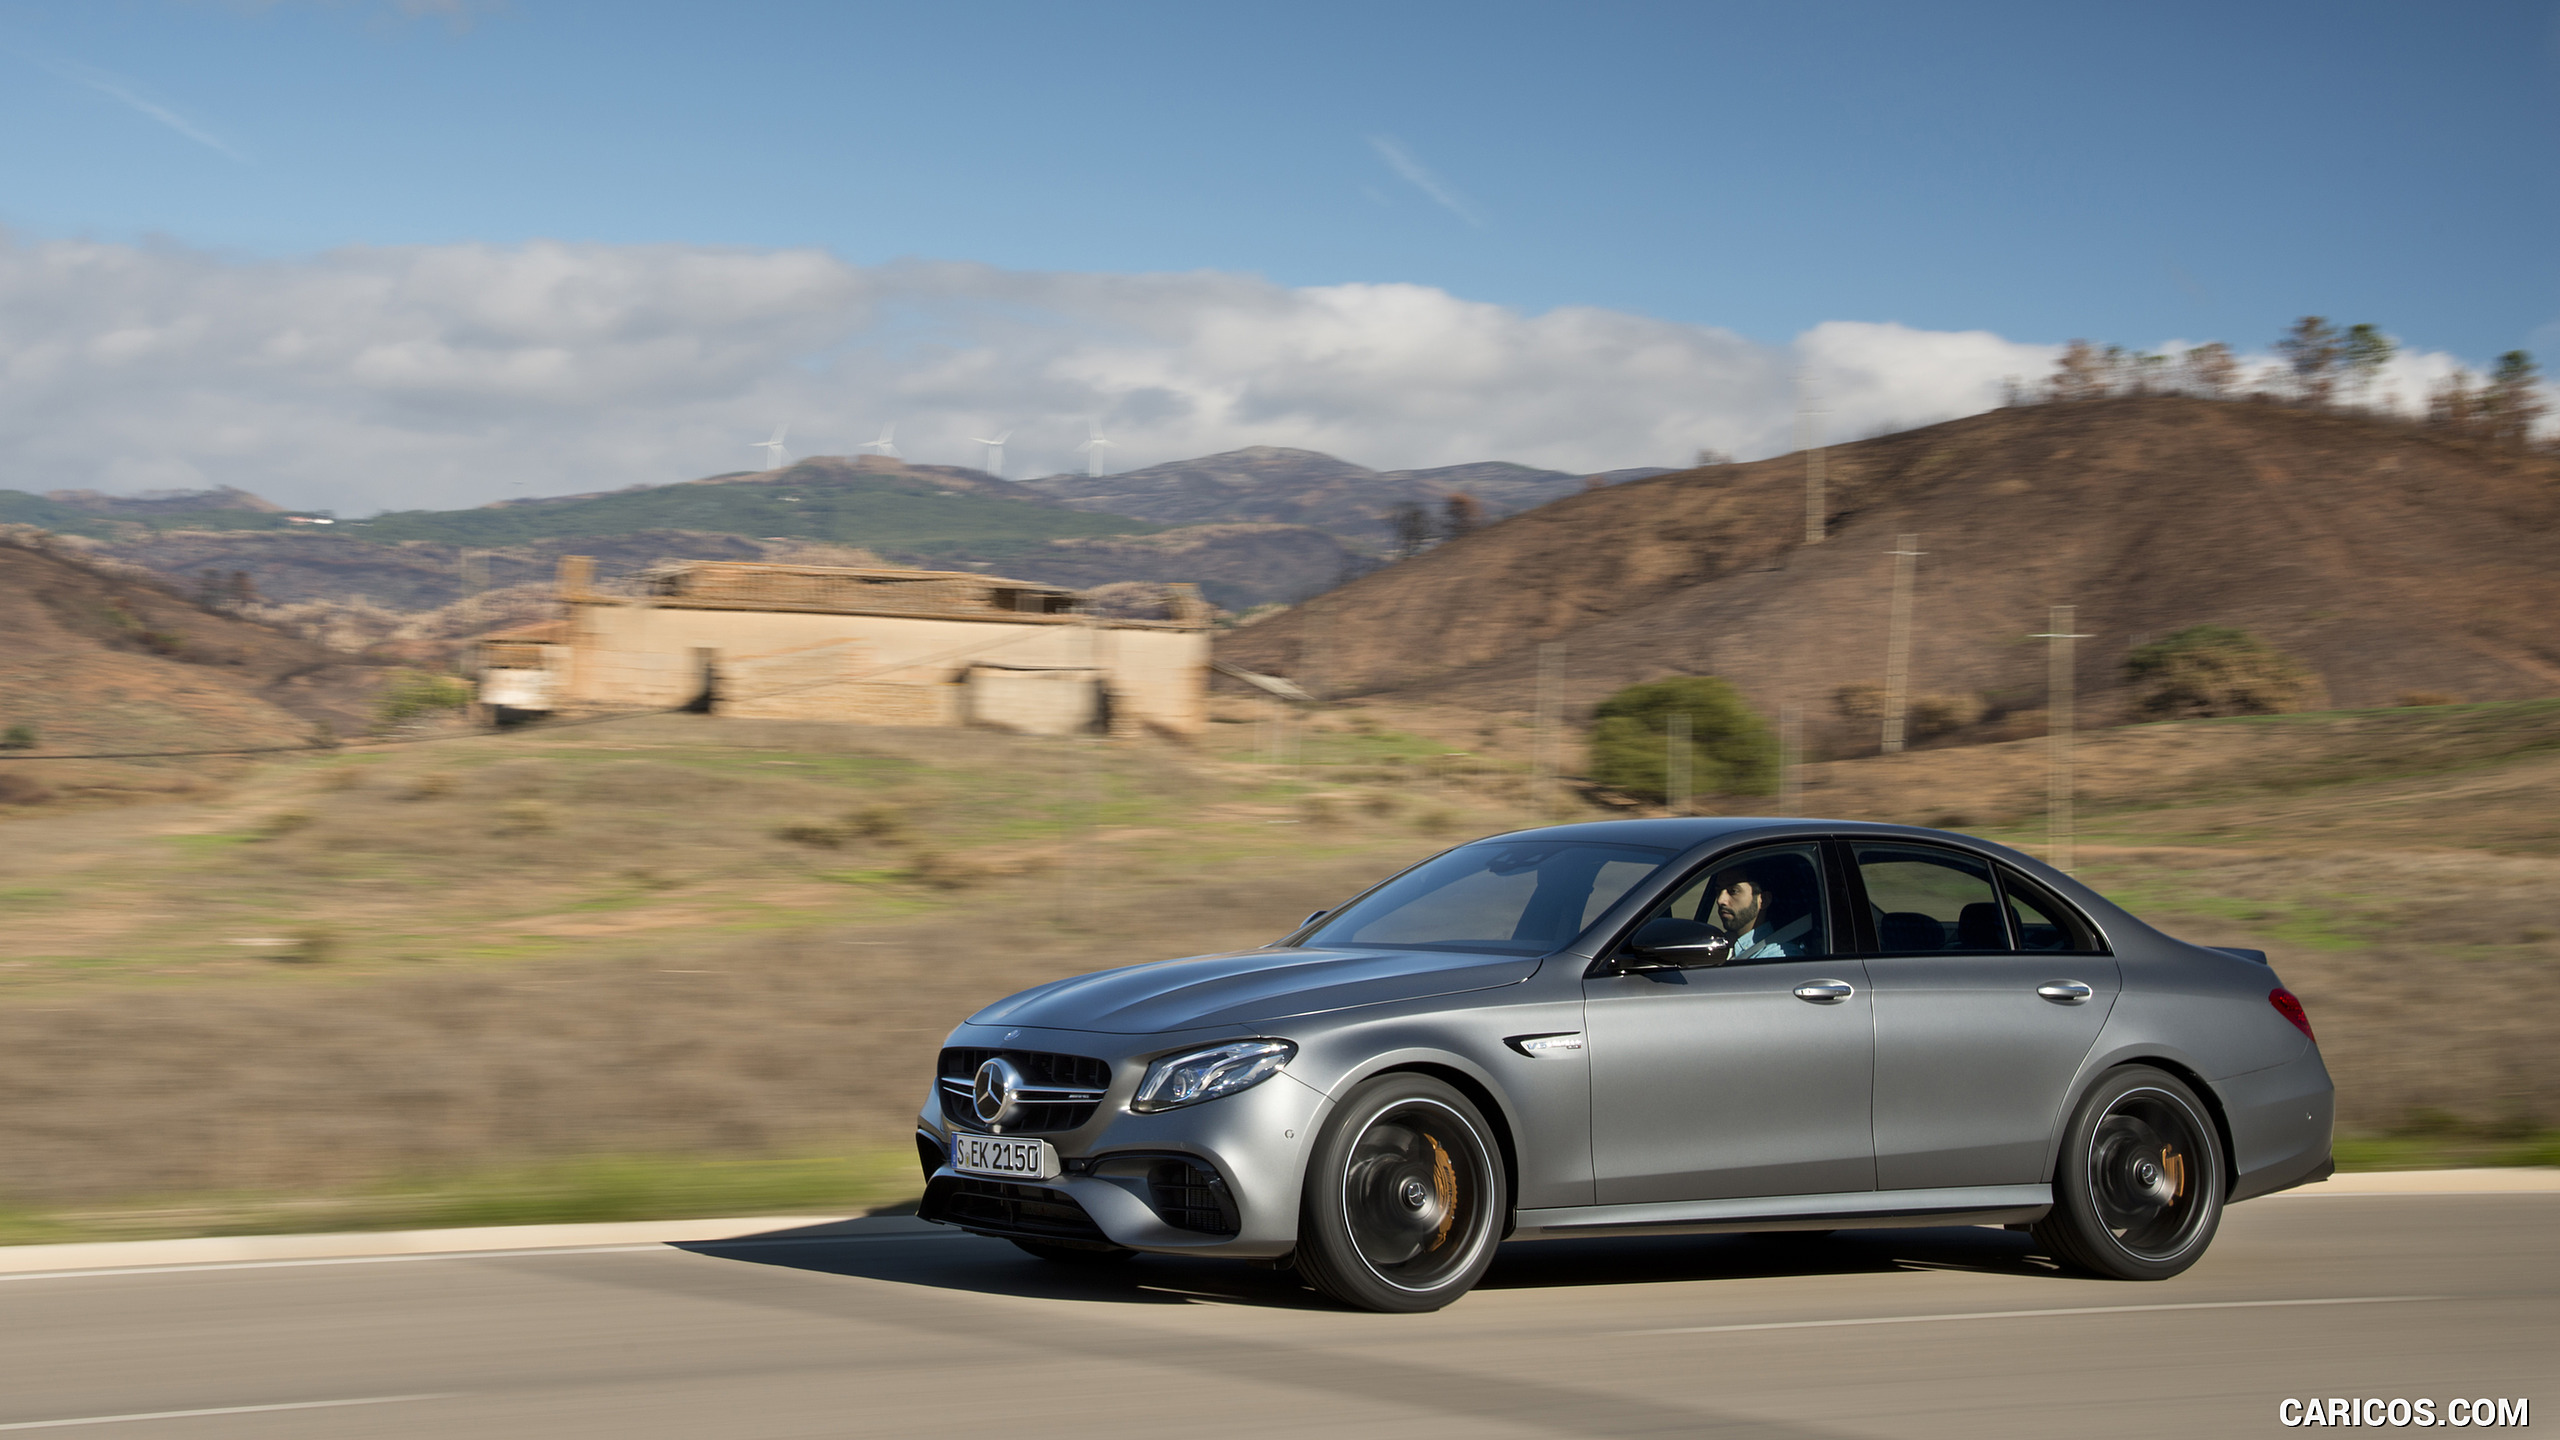 2018 Mercedes-AMG E63 S 4MATIC+ - Front, #288 of 323